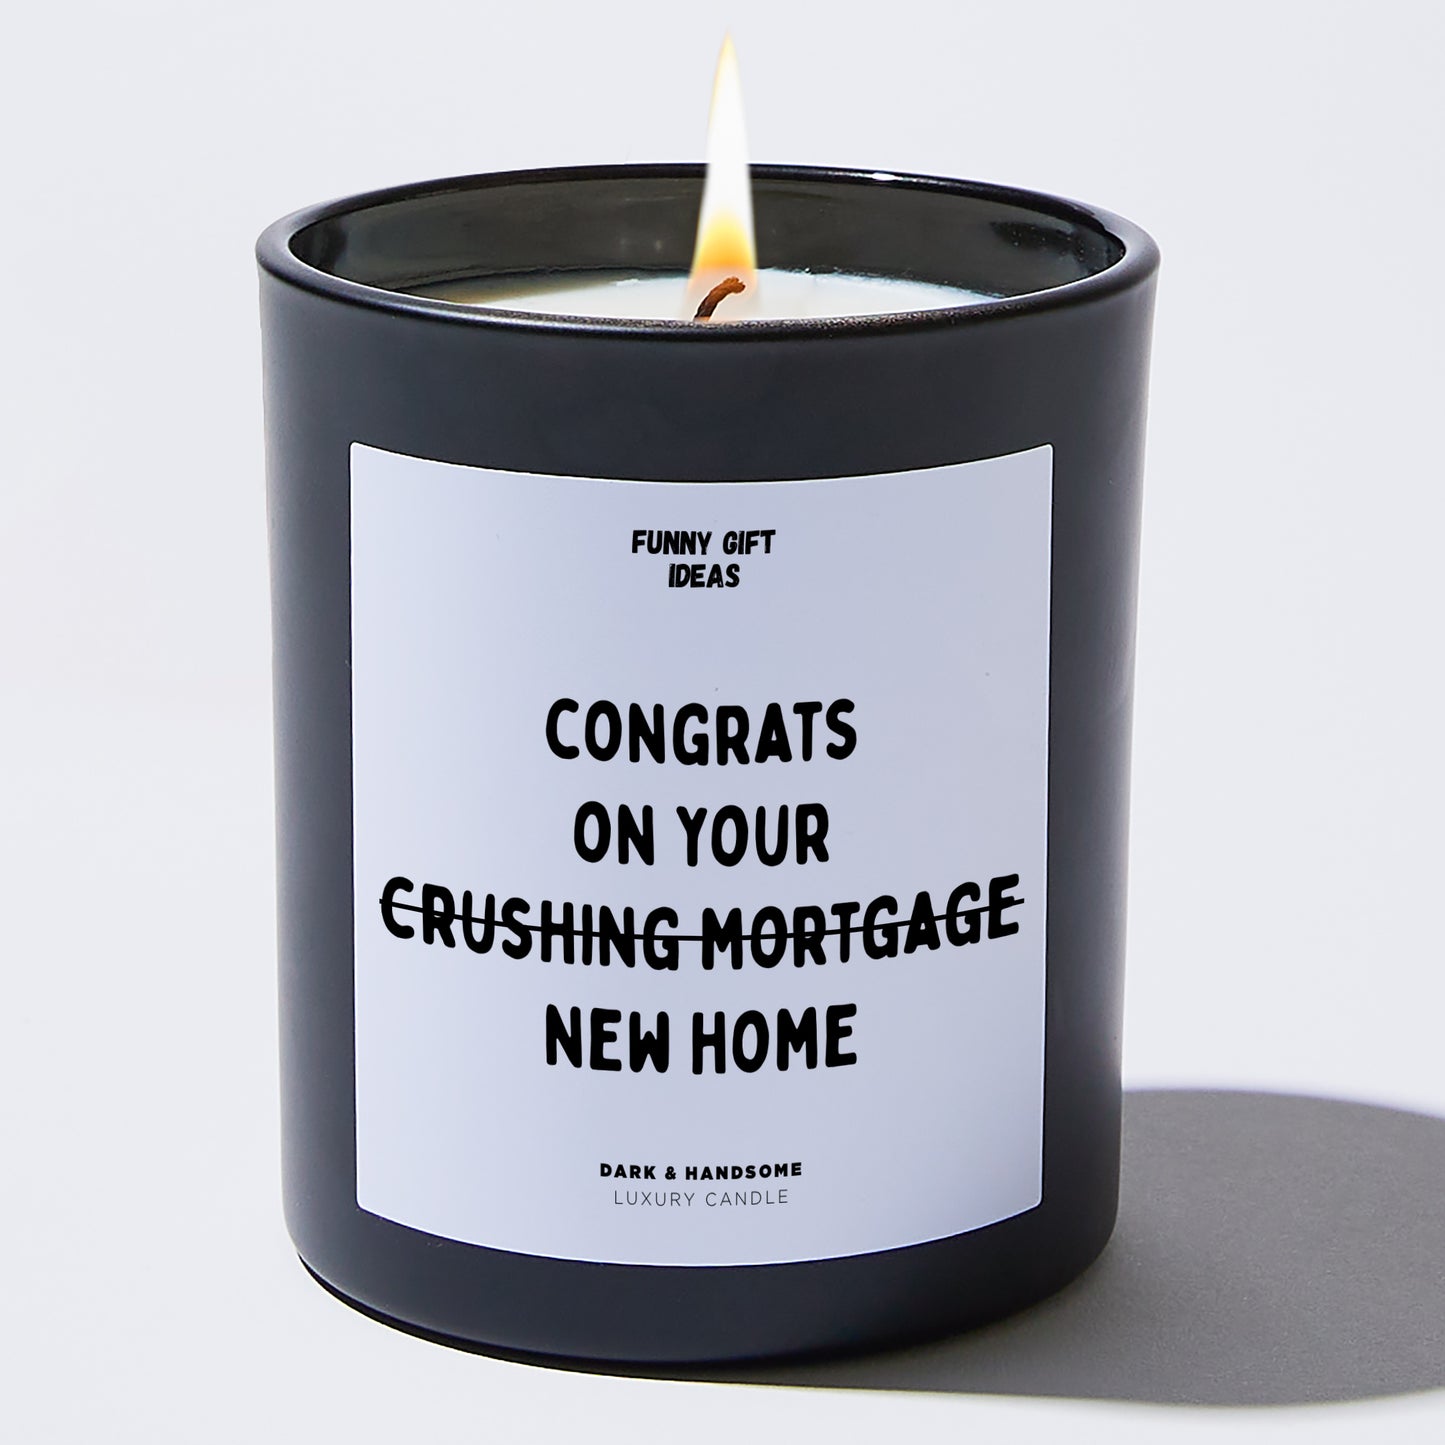 Unique Housewarming Gift - Congrats On Your Crushing Mortgage New Home - Candle